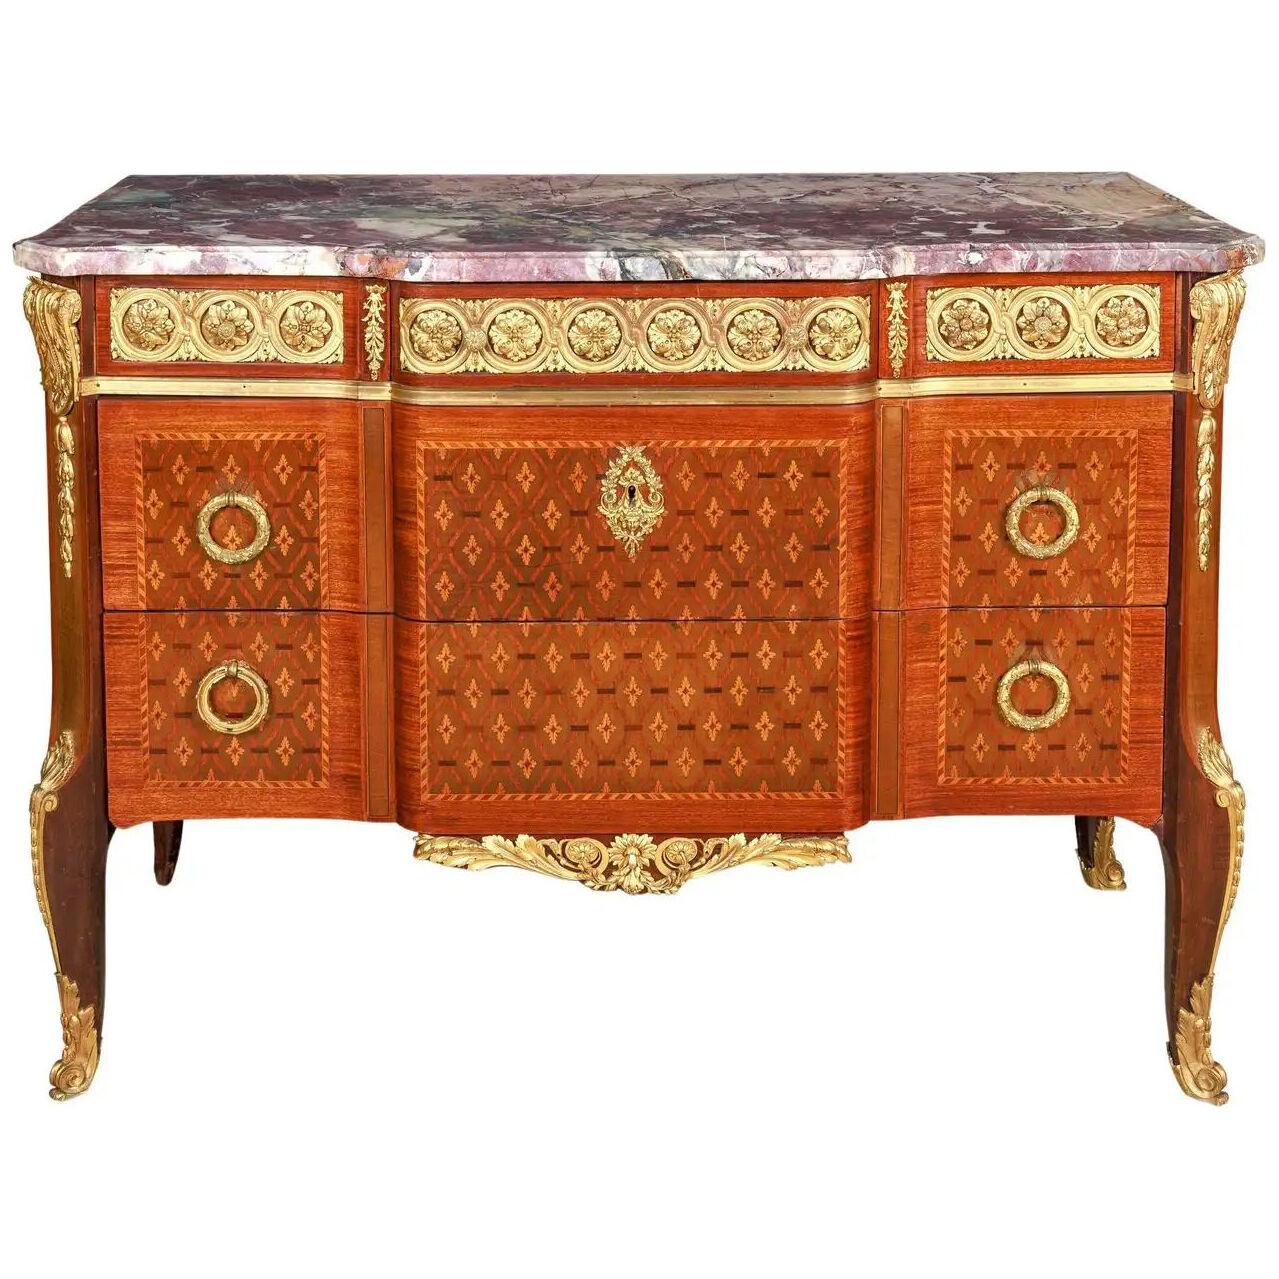 A French Louis XVI Style Ormolu-Mounted Marquetry and Parquetry Commode